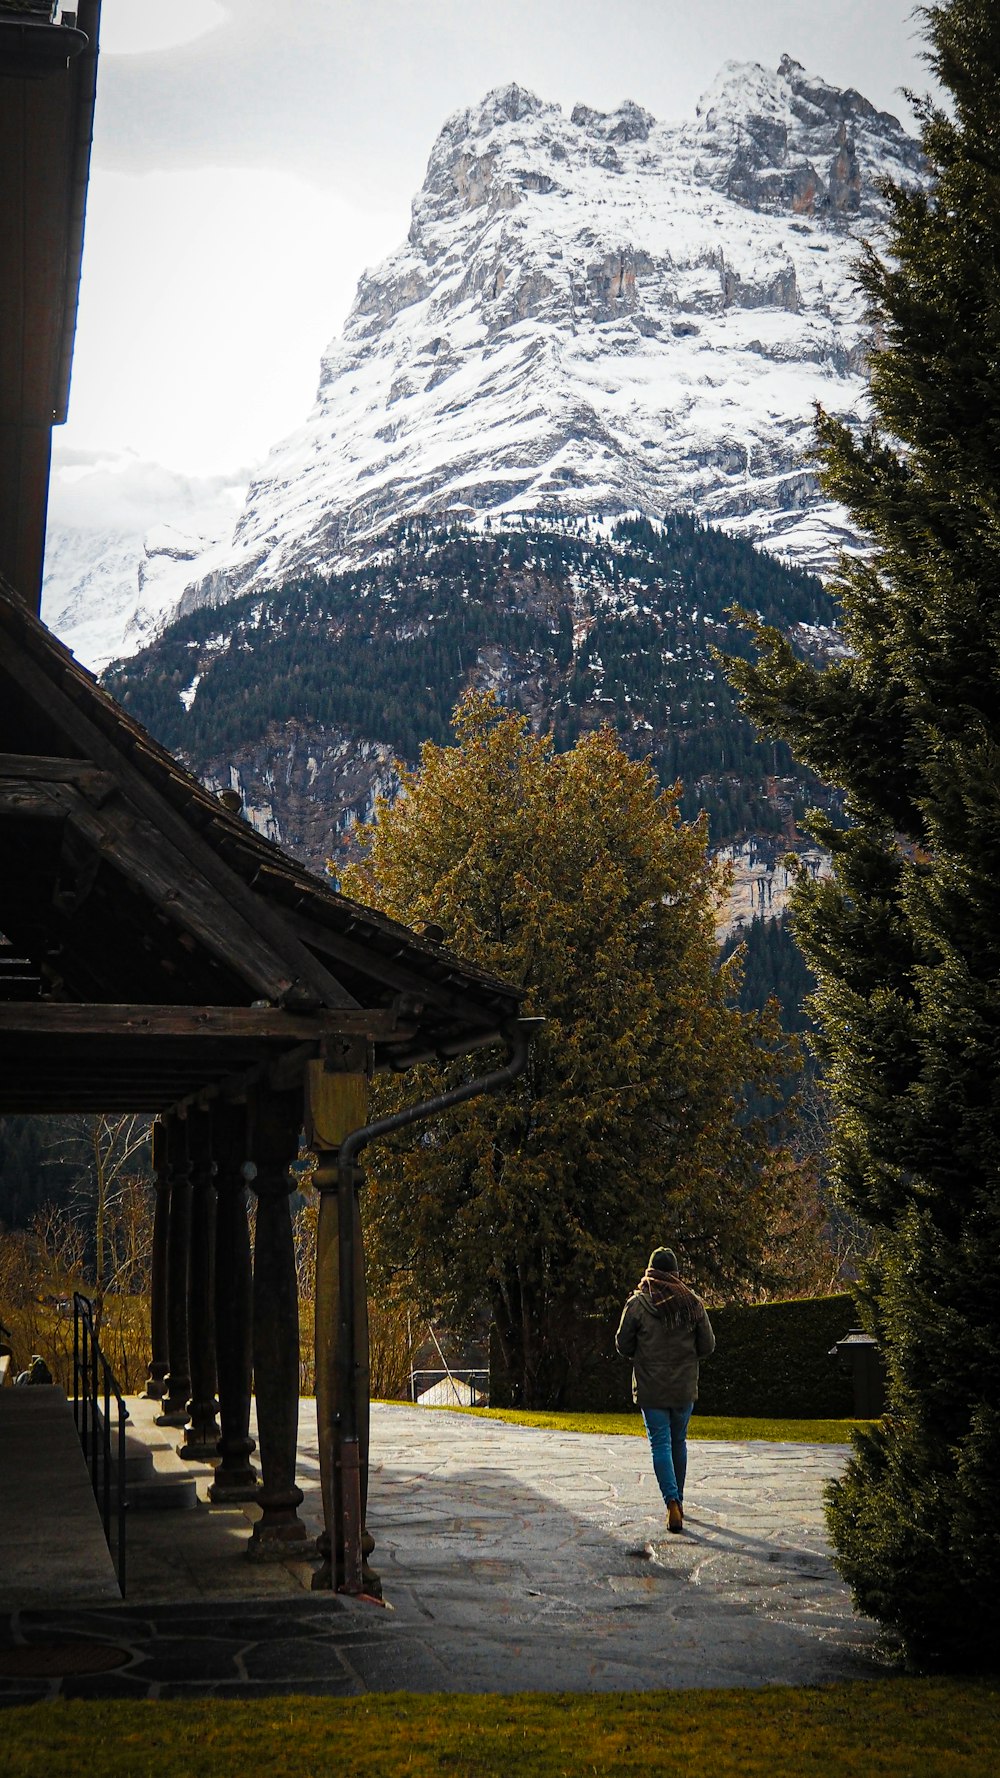 a person walking down a walkway in front of a snow covered mountain